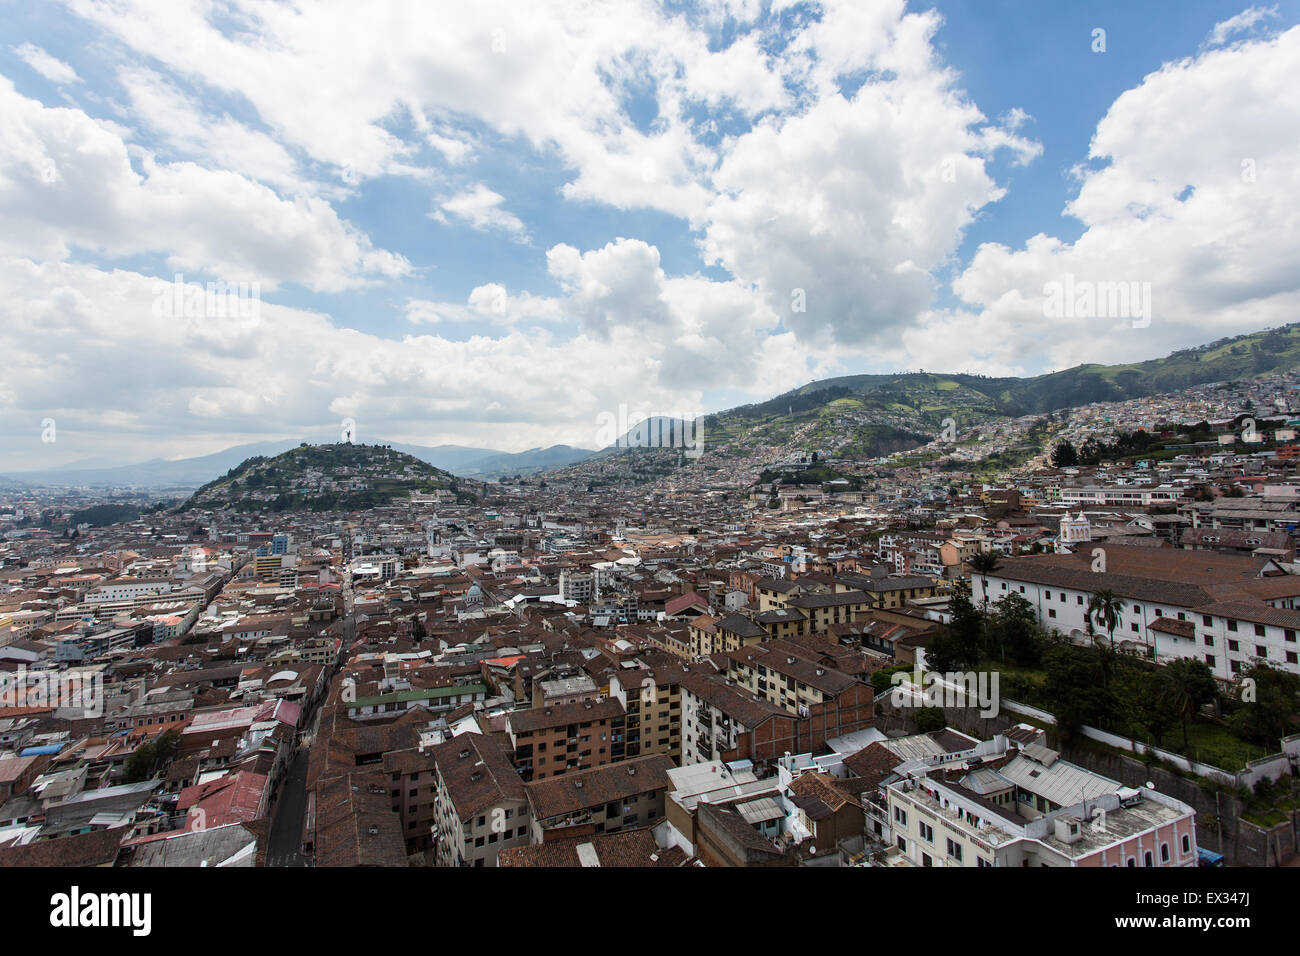 A view of the sloping hills of Quito, Ecuador with El Panecillo in the distance. Stock Photo